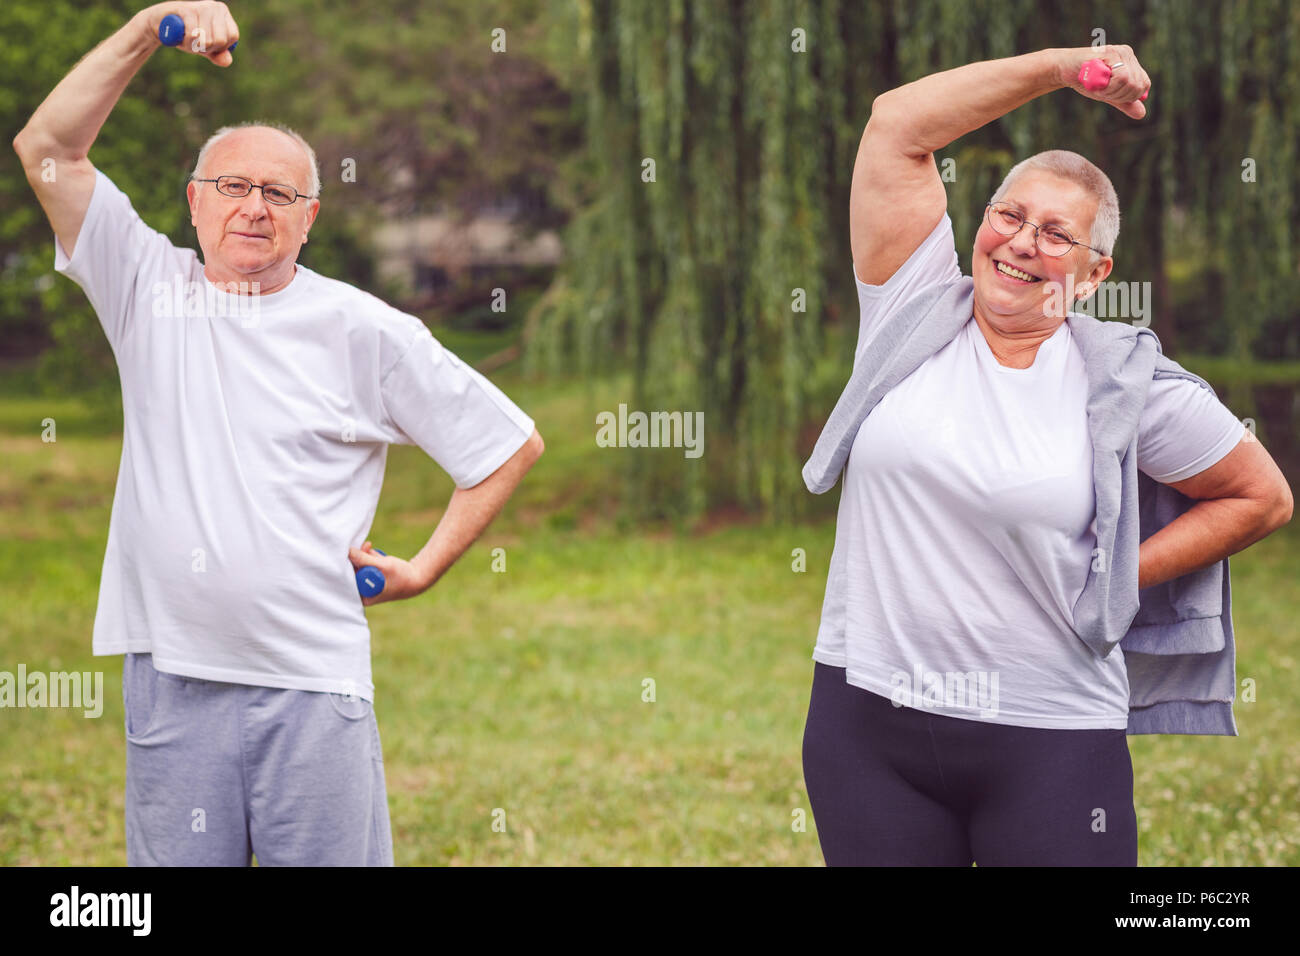 Happy senior couple exercise and having fun together Stock Photo